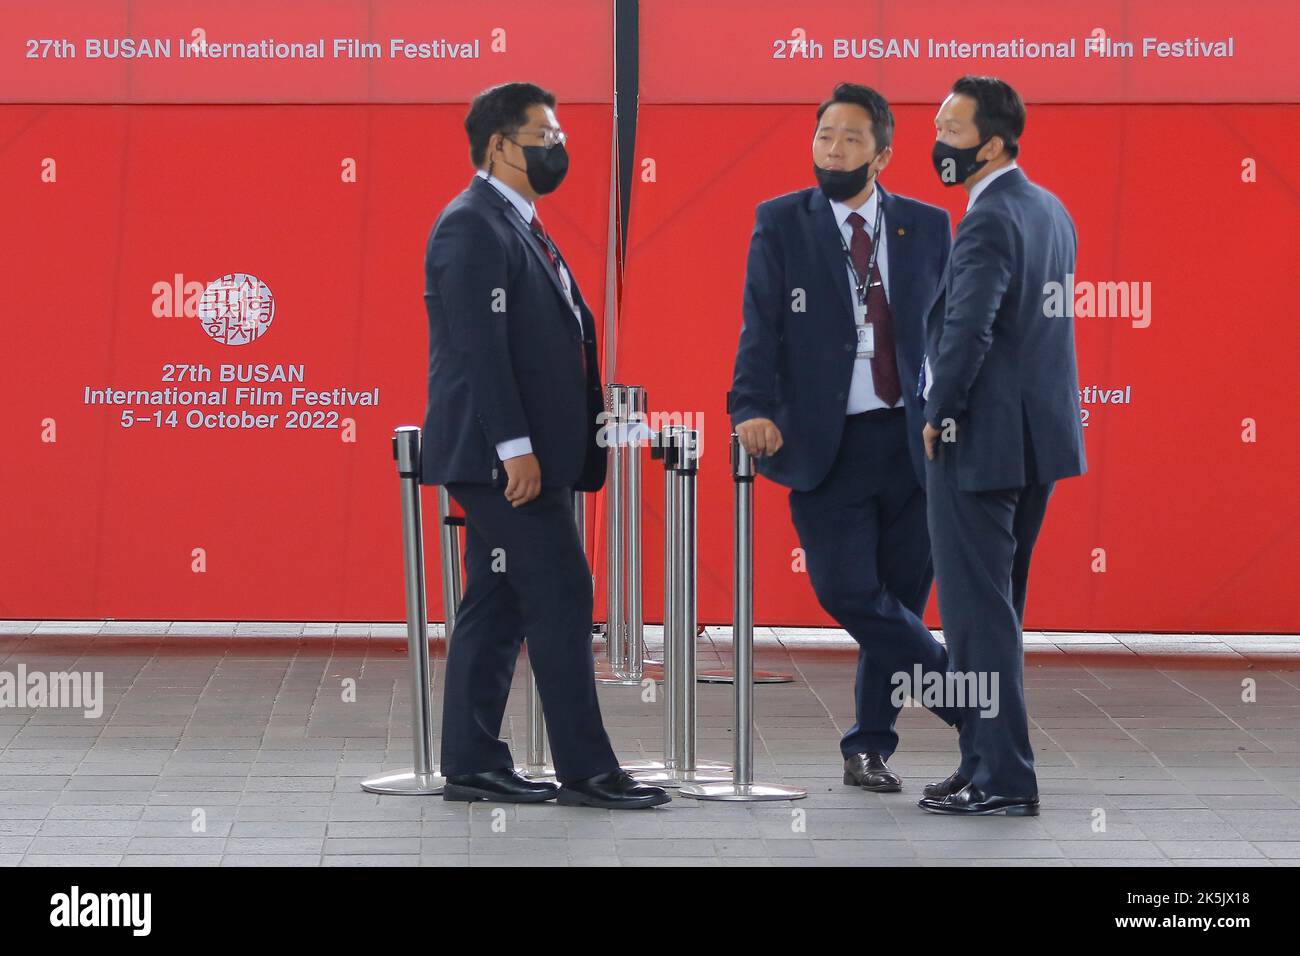 Oct 5, 2022-Busan, South Korea-Security Guards stand by for work for the 27th Busan international film festival at cinema square in Busan, South Korea. Stock Photo